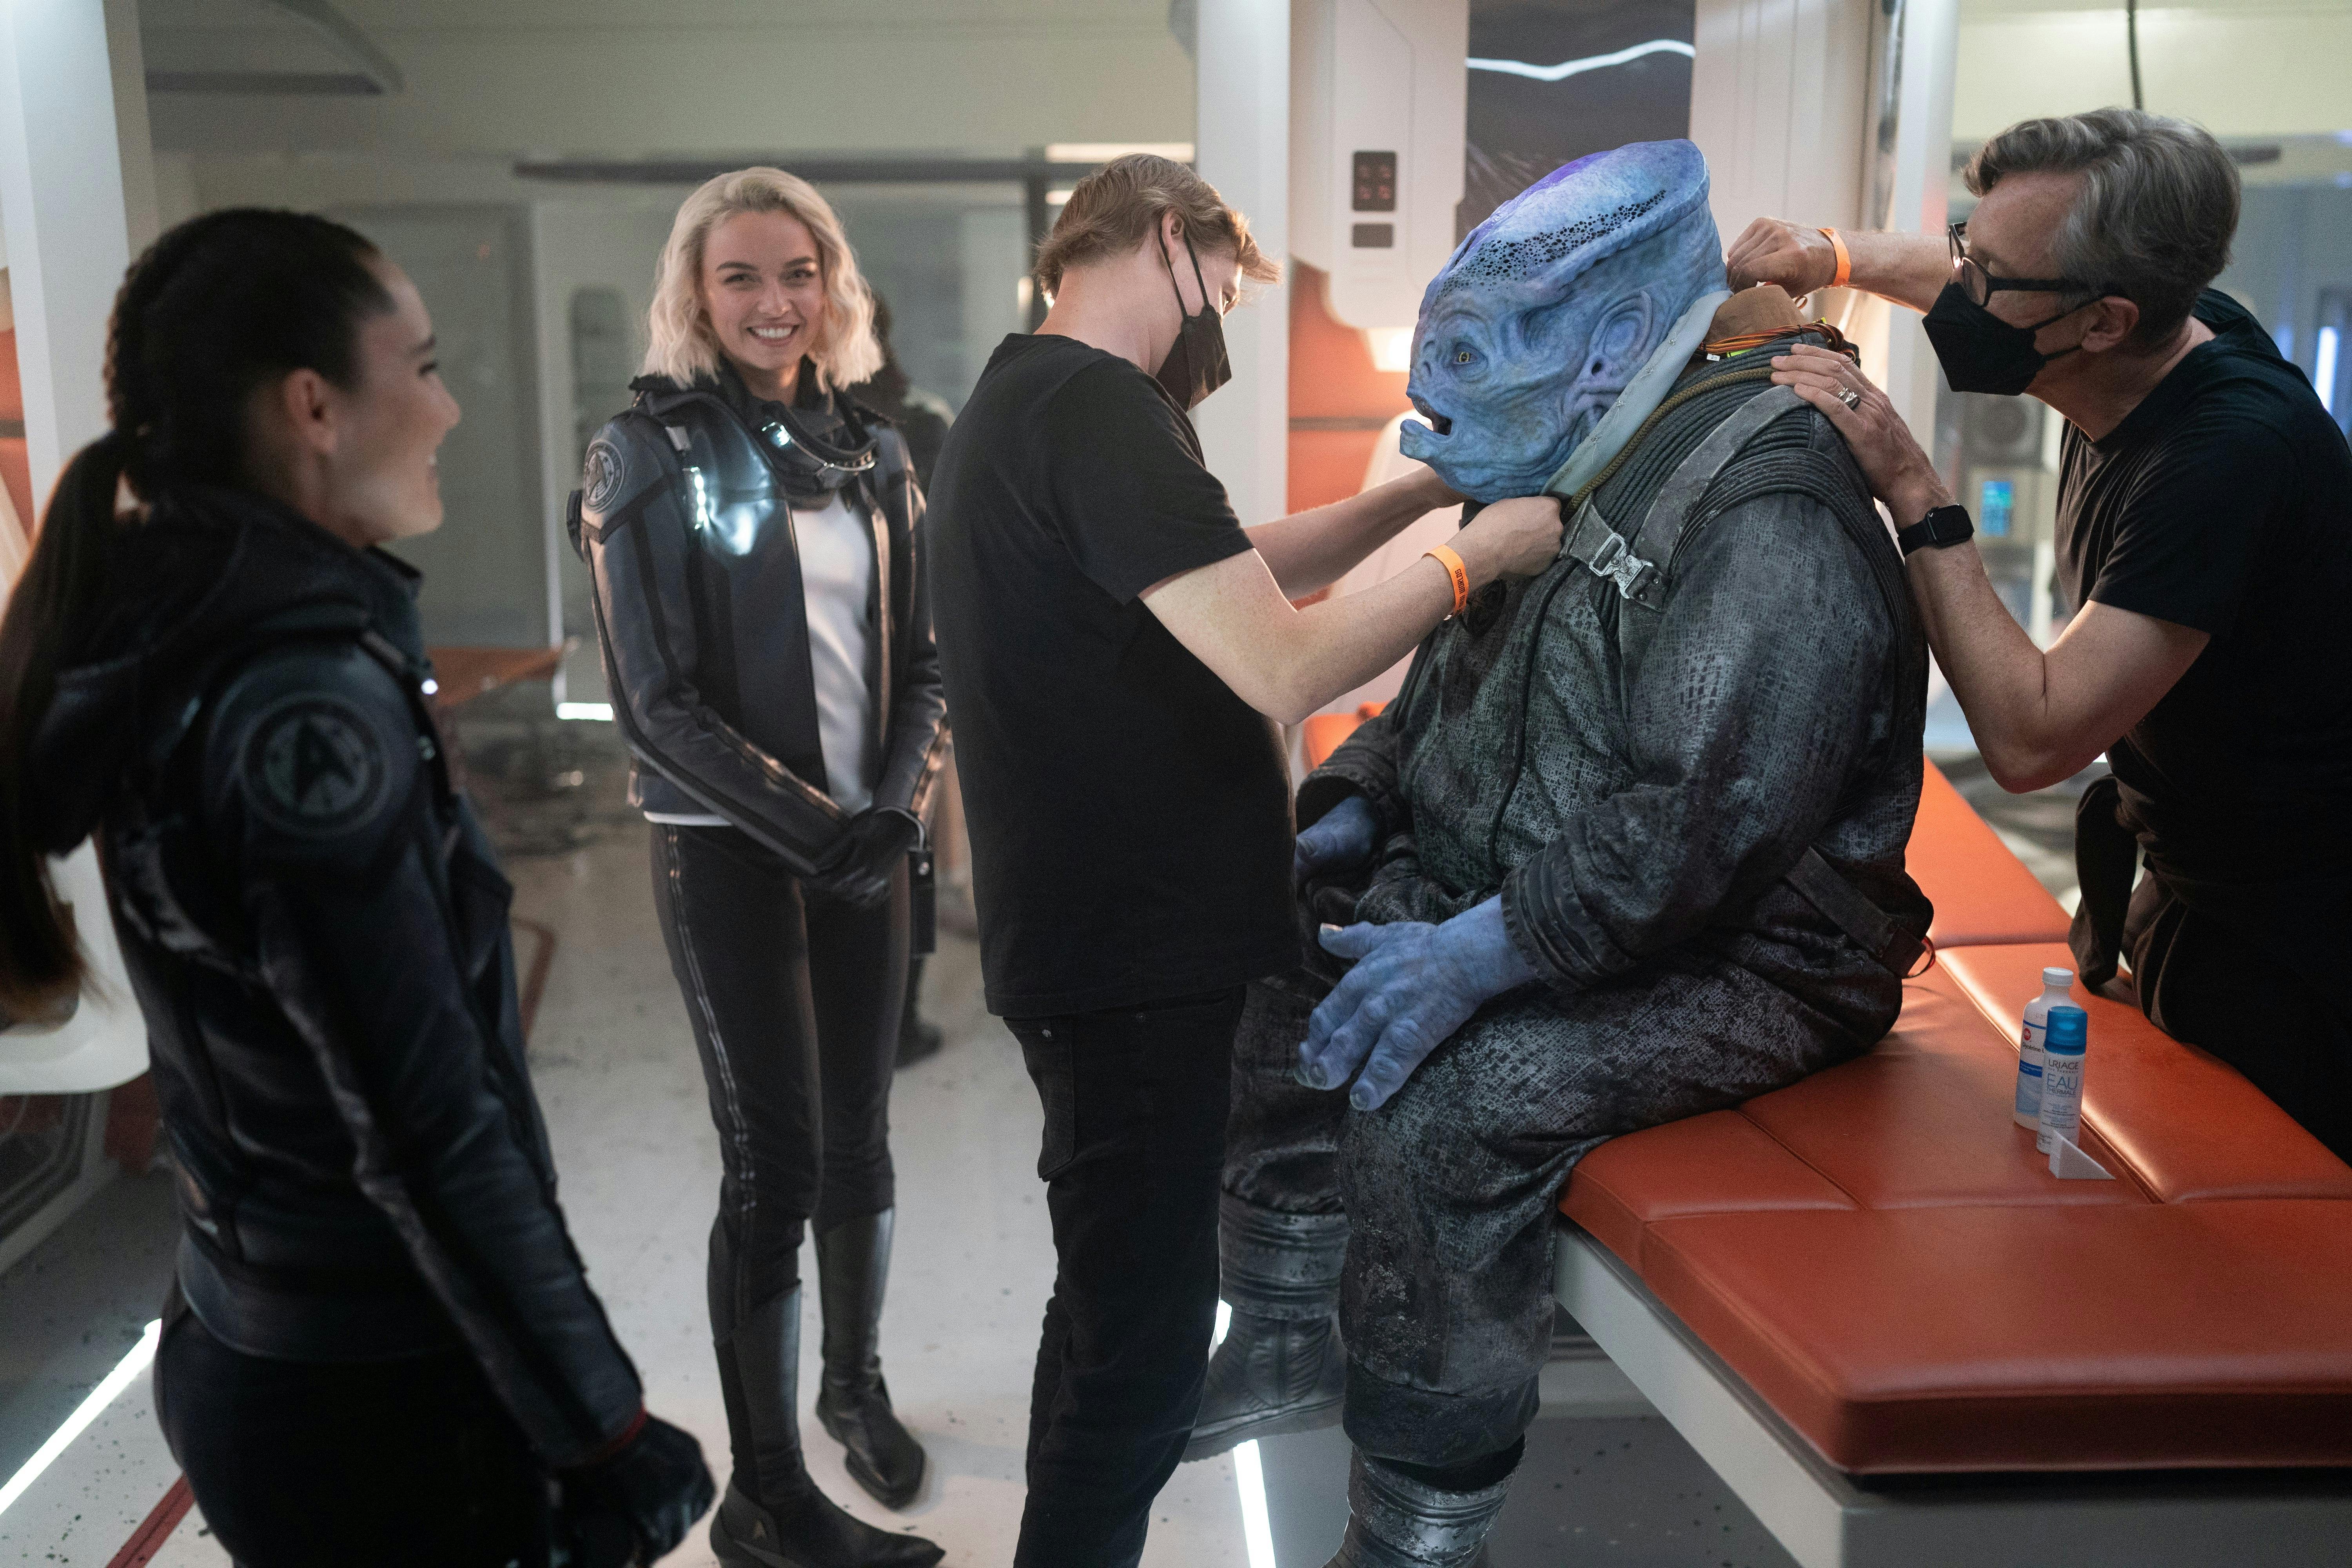 Jess Bush and Christina Chong laugh as the crew gets ready to film a scene with a blue alien.